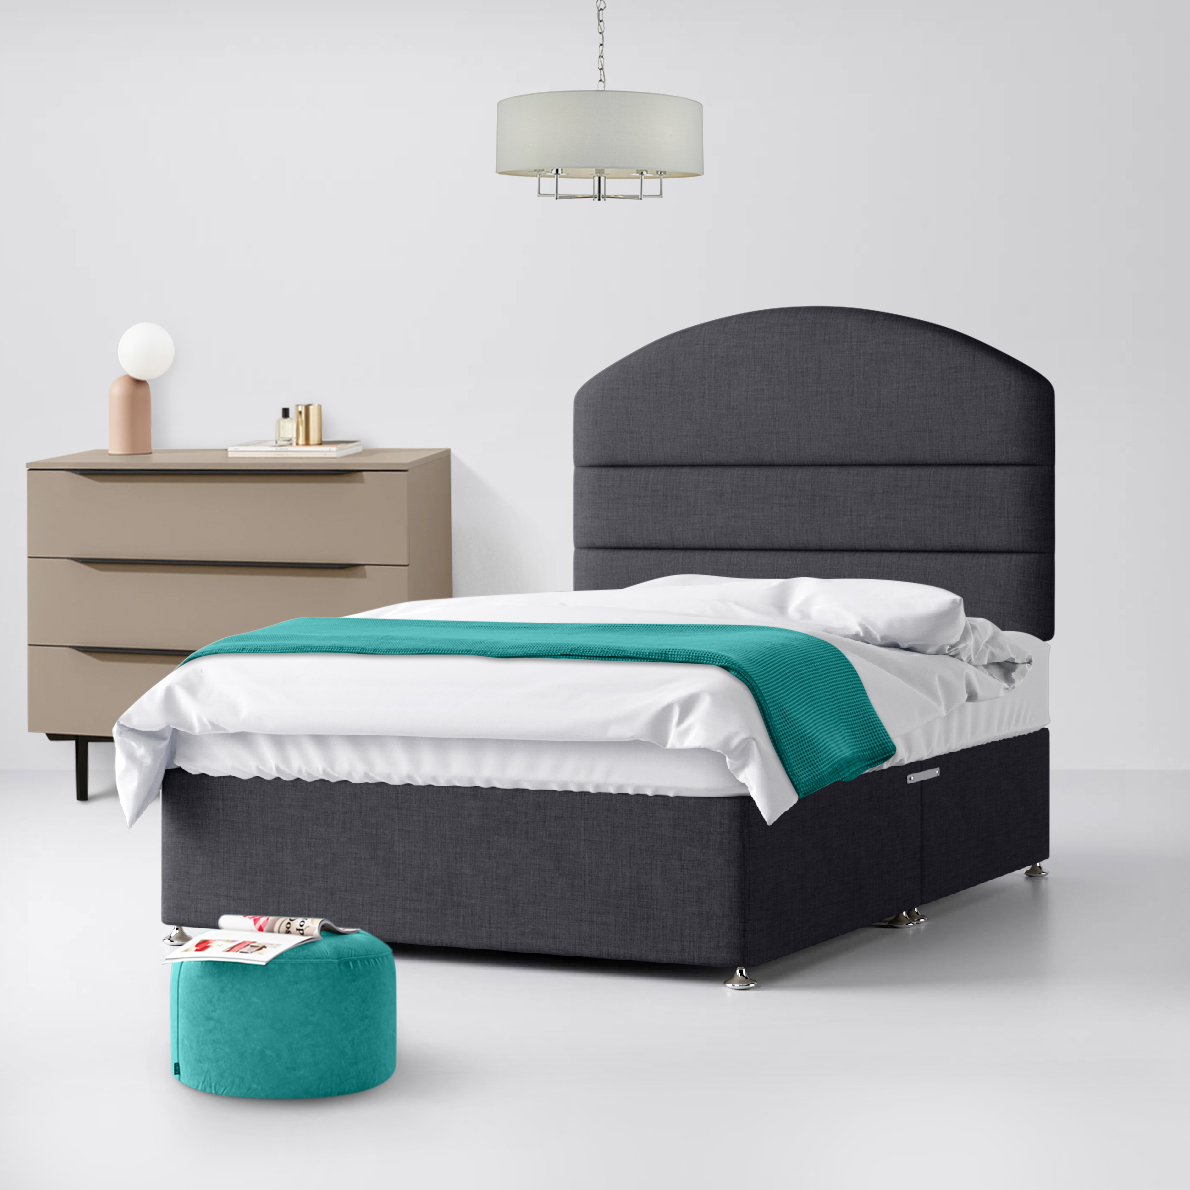 Small Single - Divan Bed and Dudley Lined Headboard - Dark Grey - Charcoal - Fabric - 2ft6 - Happy Beds